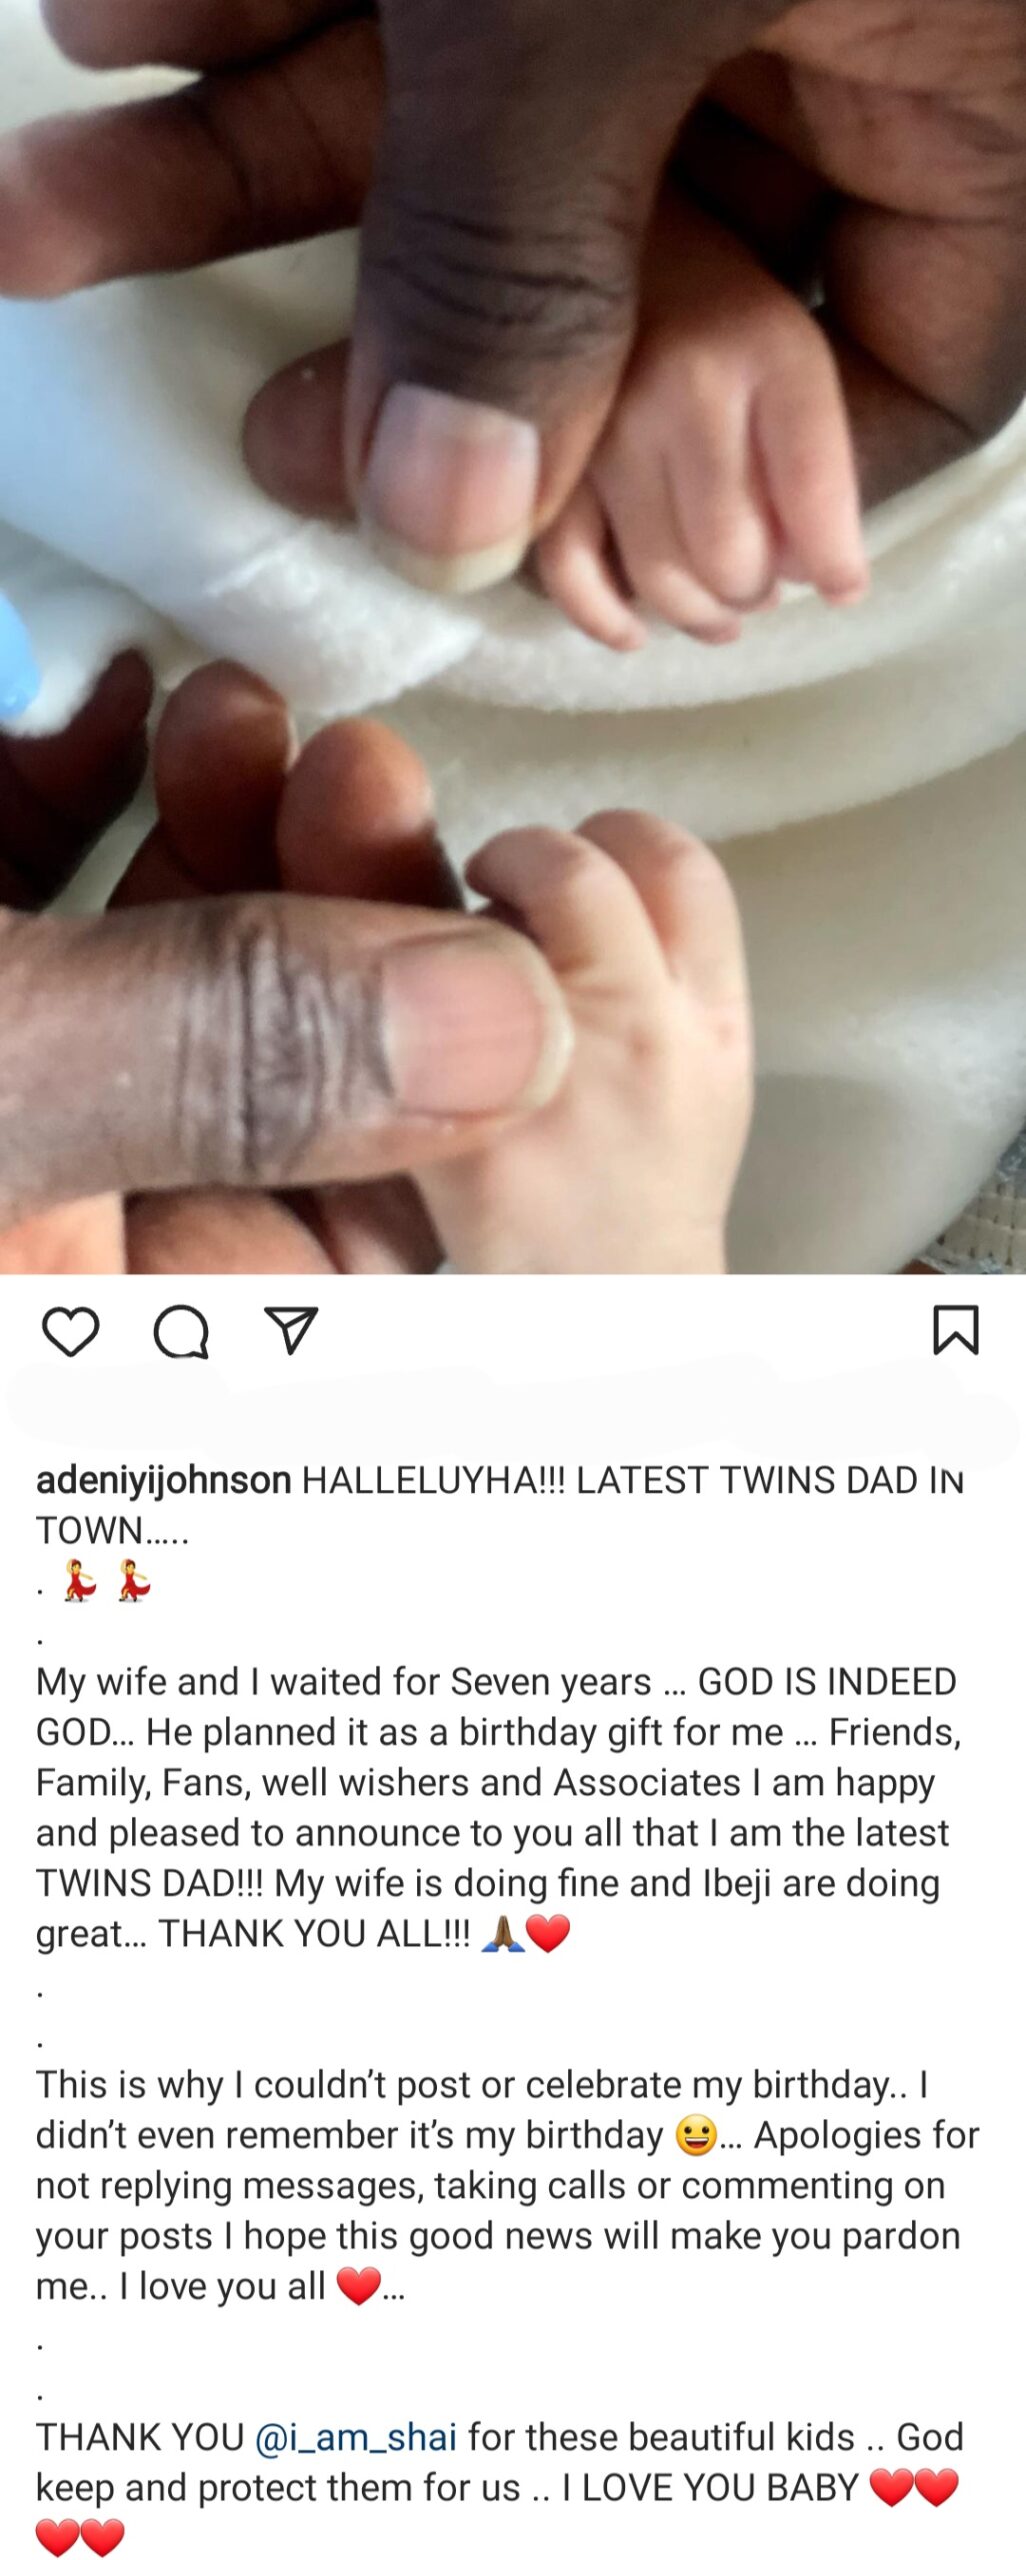 ACTOR ADENIYI JOHNSON AND ACTRESS SEYI EDUN WELCOME TWINS AFTER 7 YEARS OF WAITING